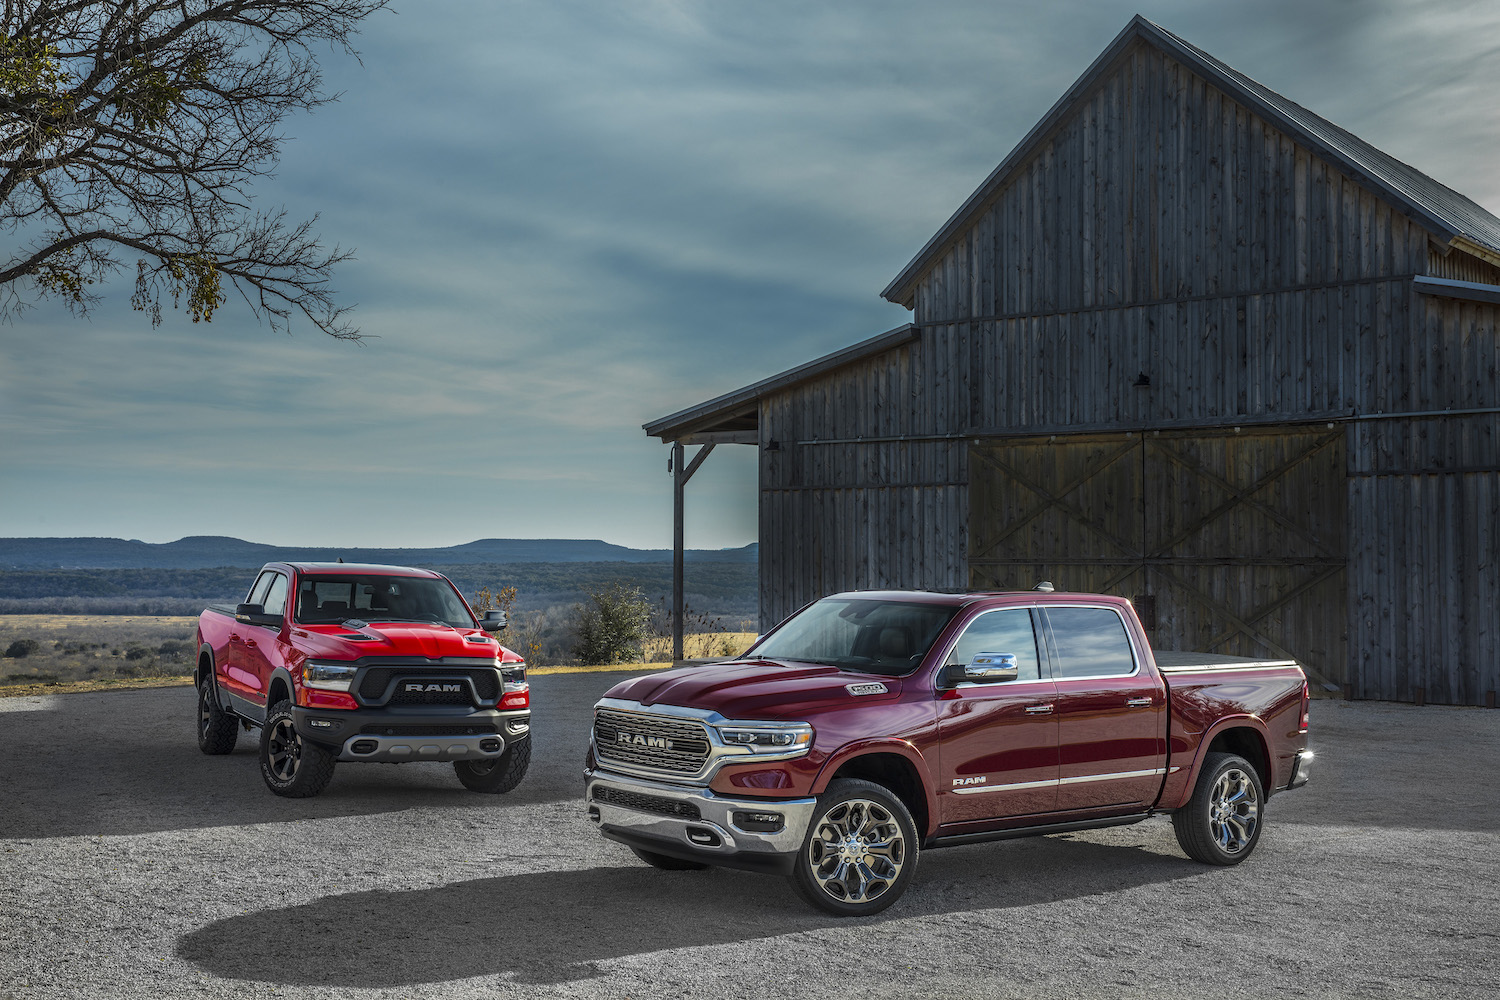 Promo shot of a Ram 1500 Rebel and Limited pickup truck parked in front of a barn.